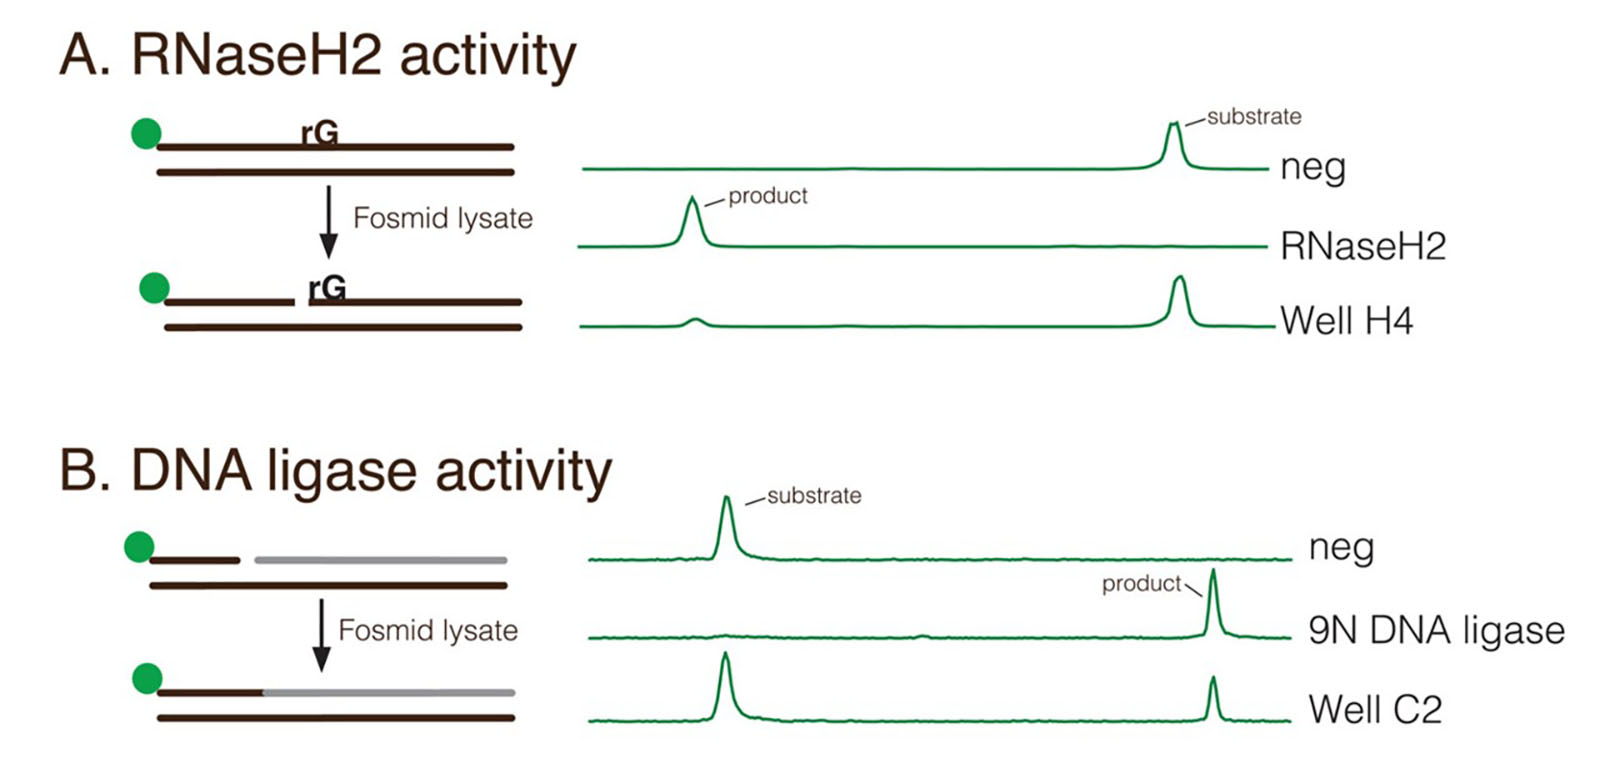 Diagrams showing RNaseH2 and DNA ligase activity assays